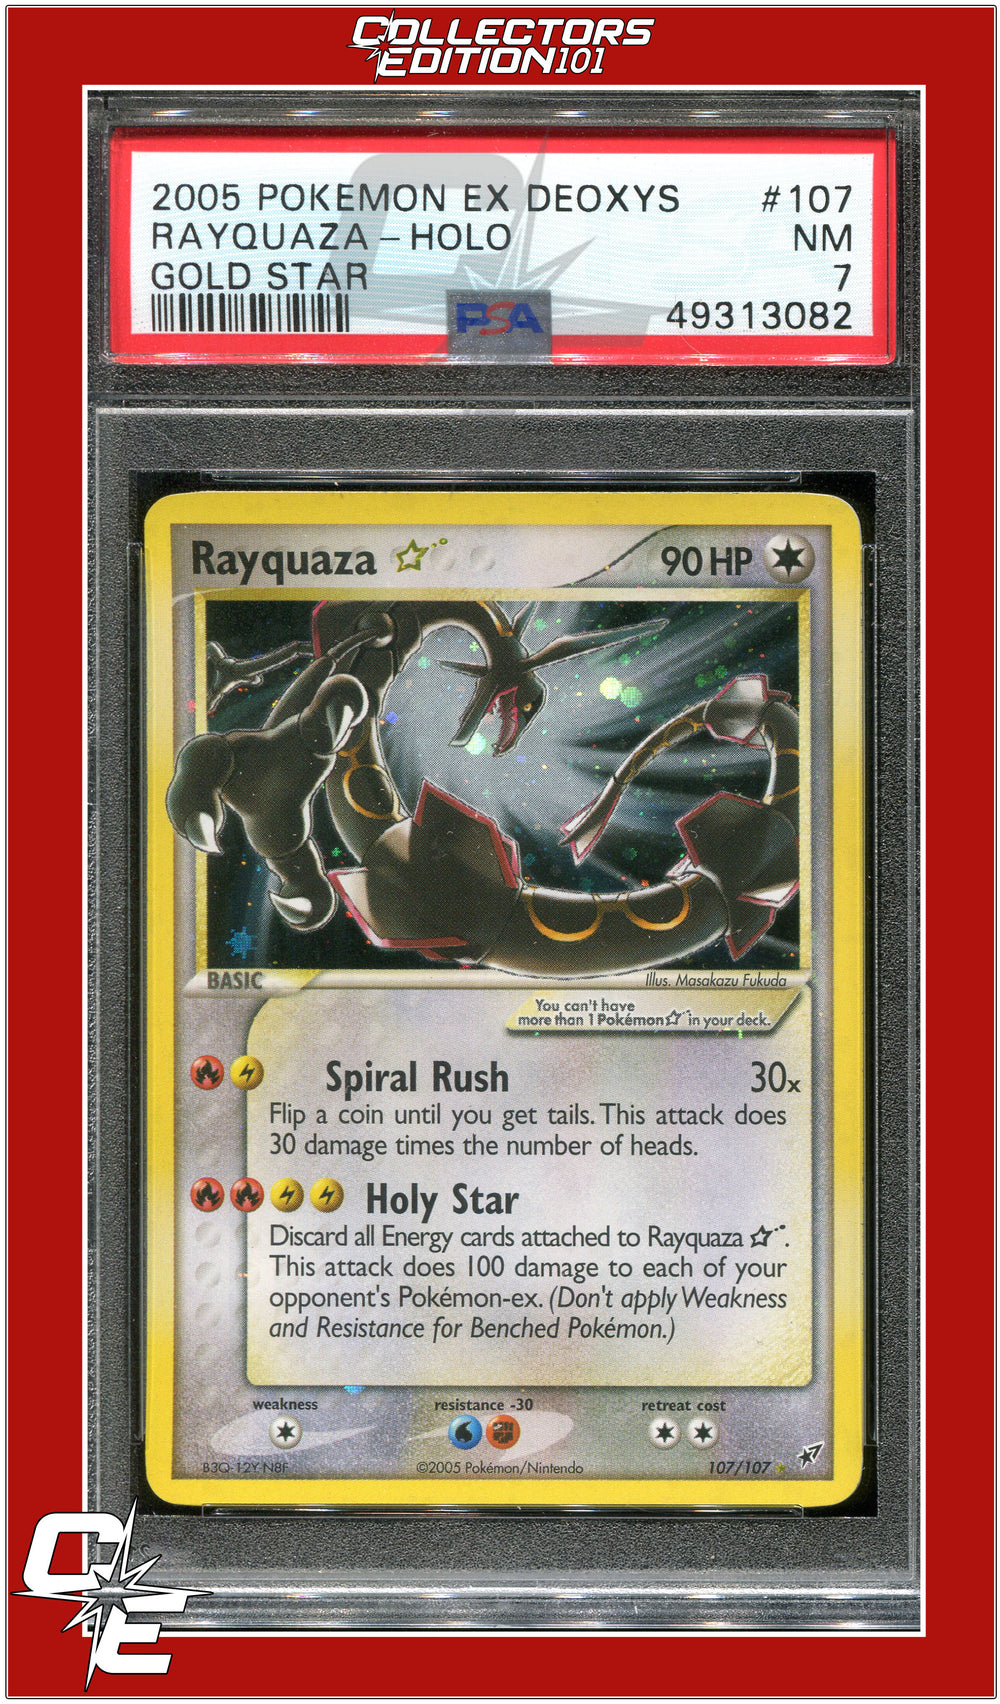 EX Deoxys 107 Rayquaza Holo Gold Star PSA 7